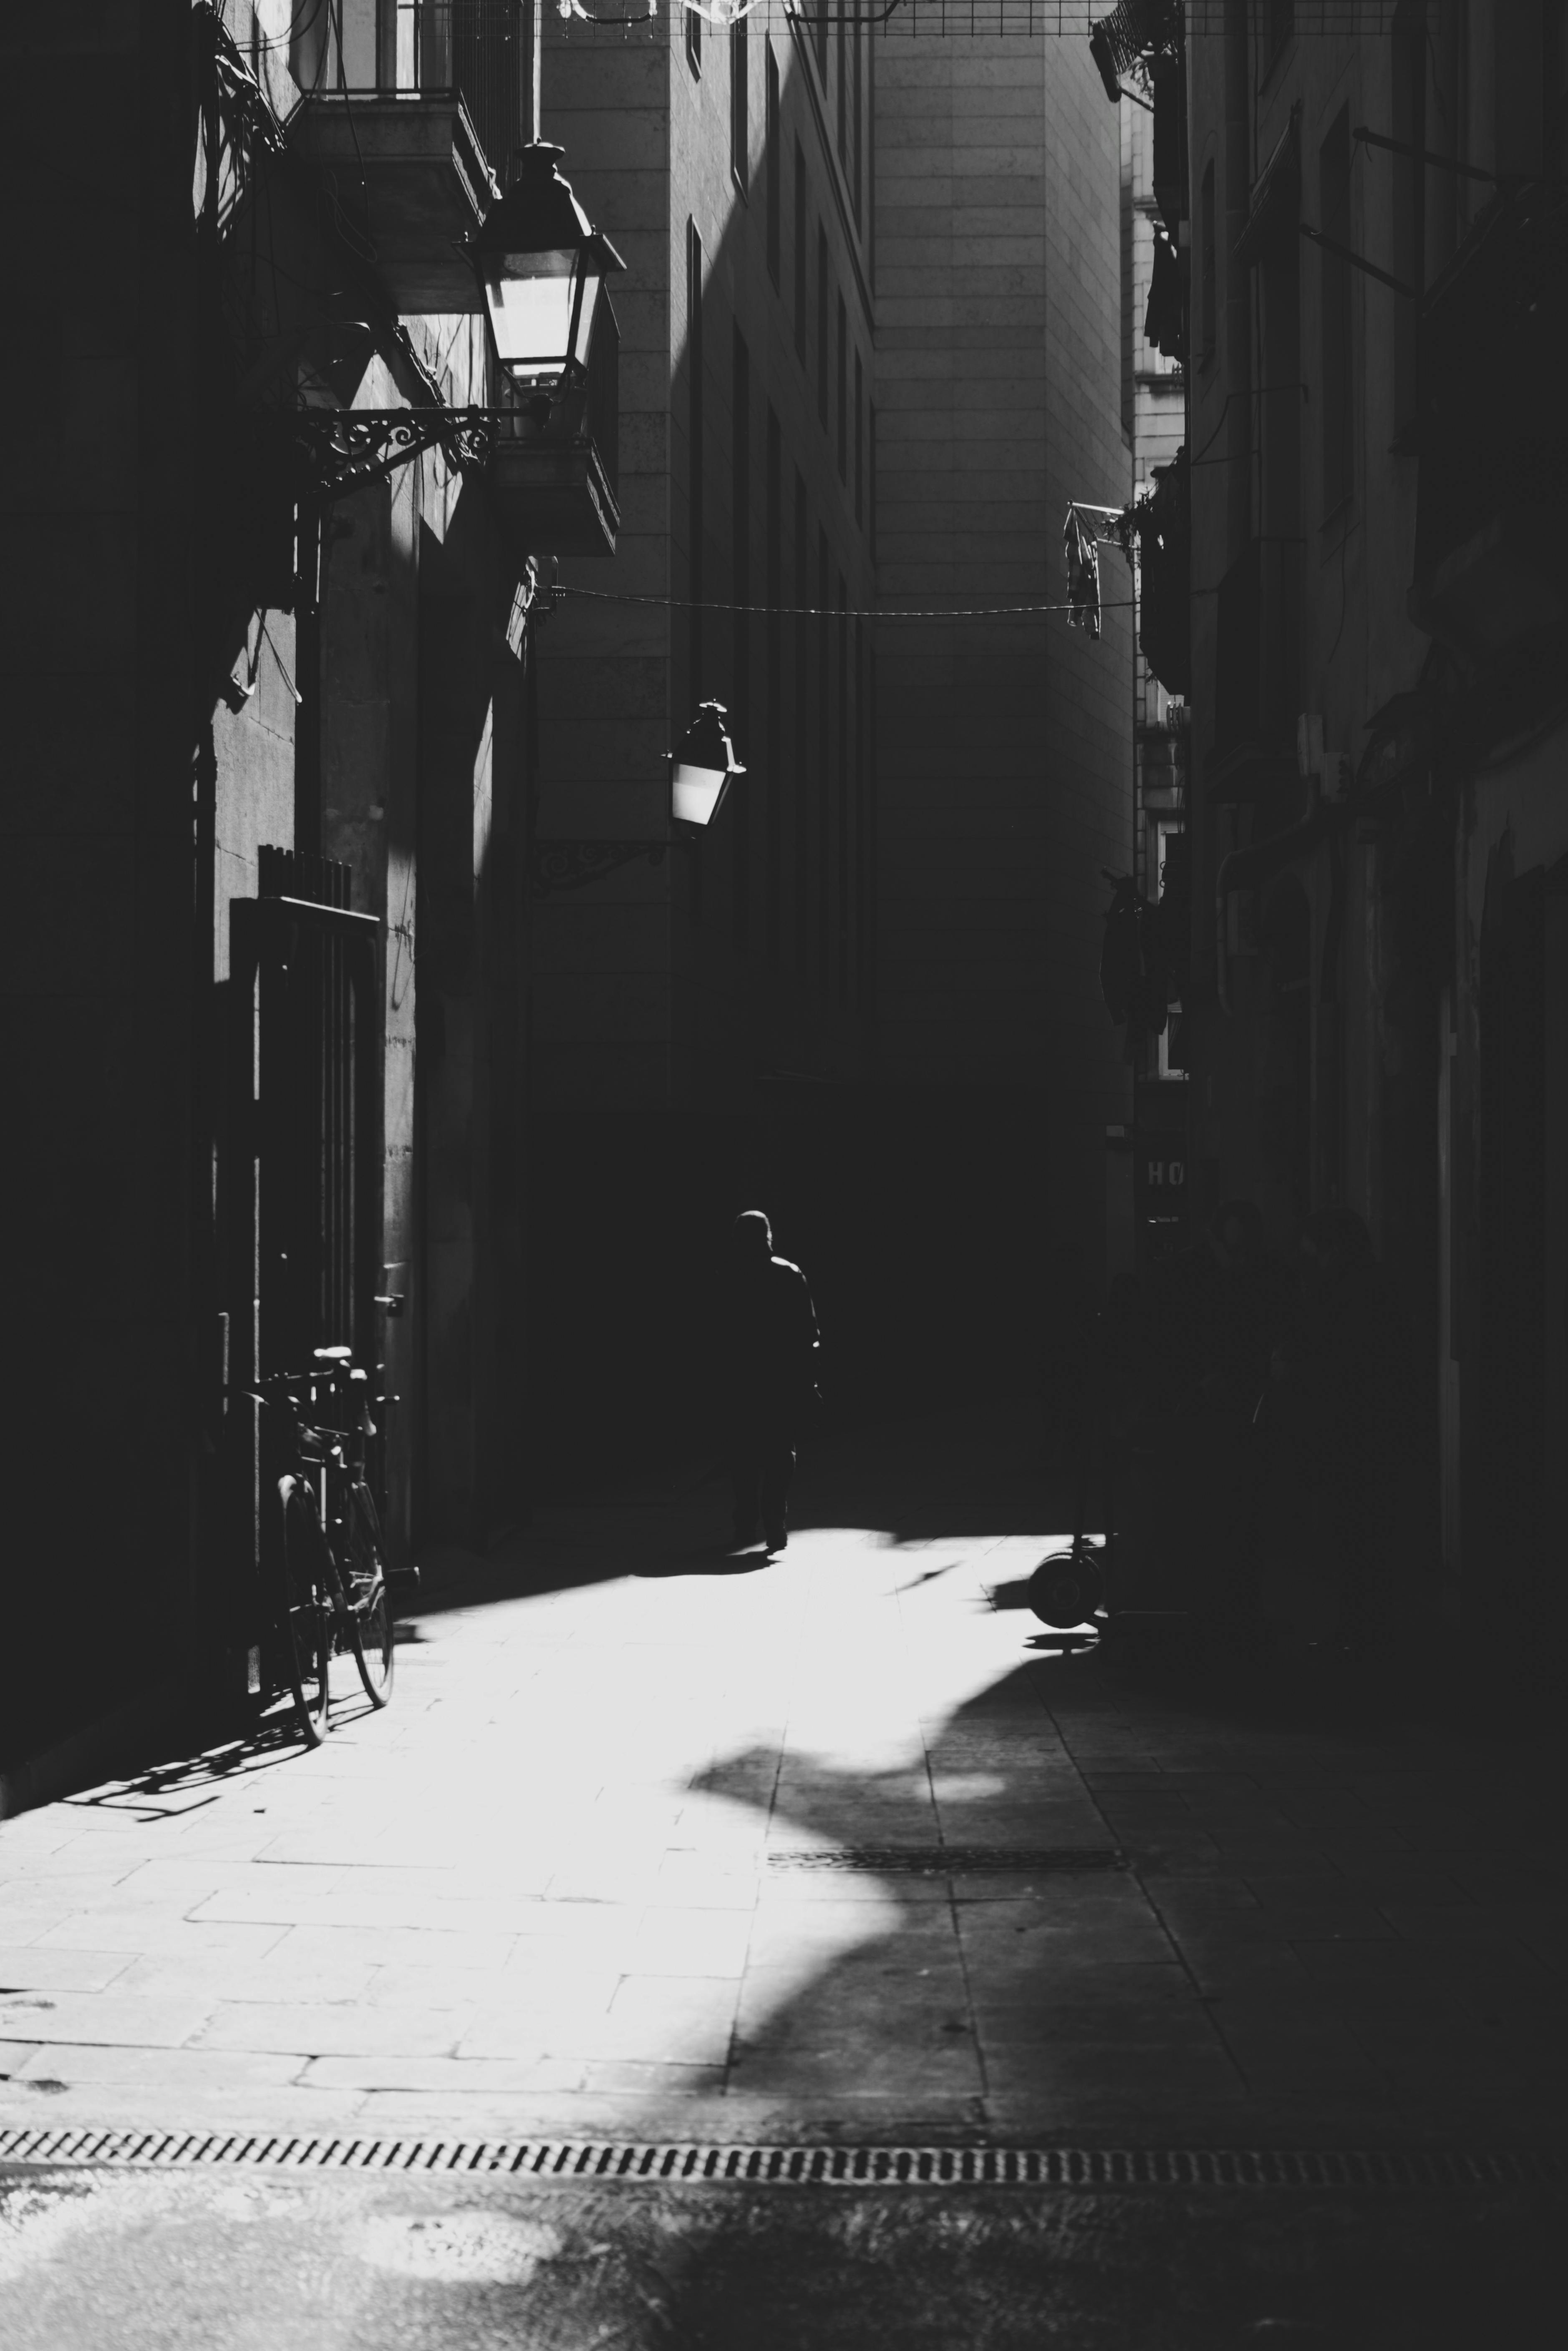 Sunlit Alley in Town in Black and White